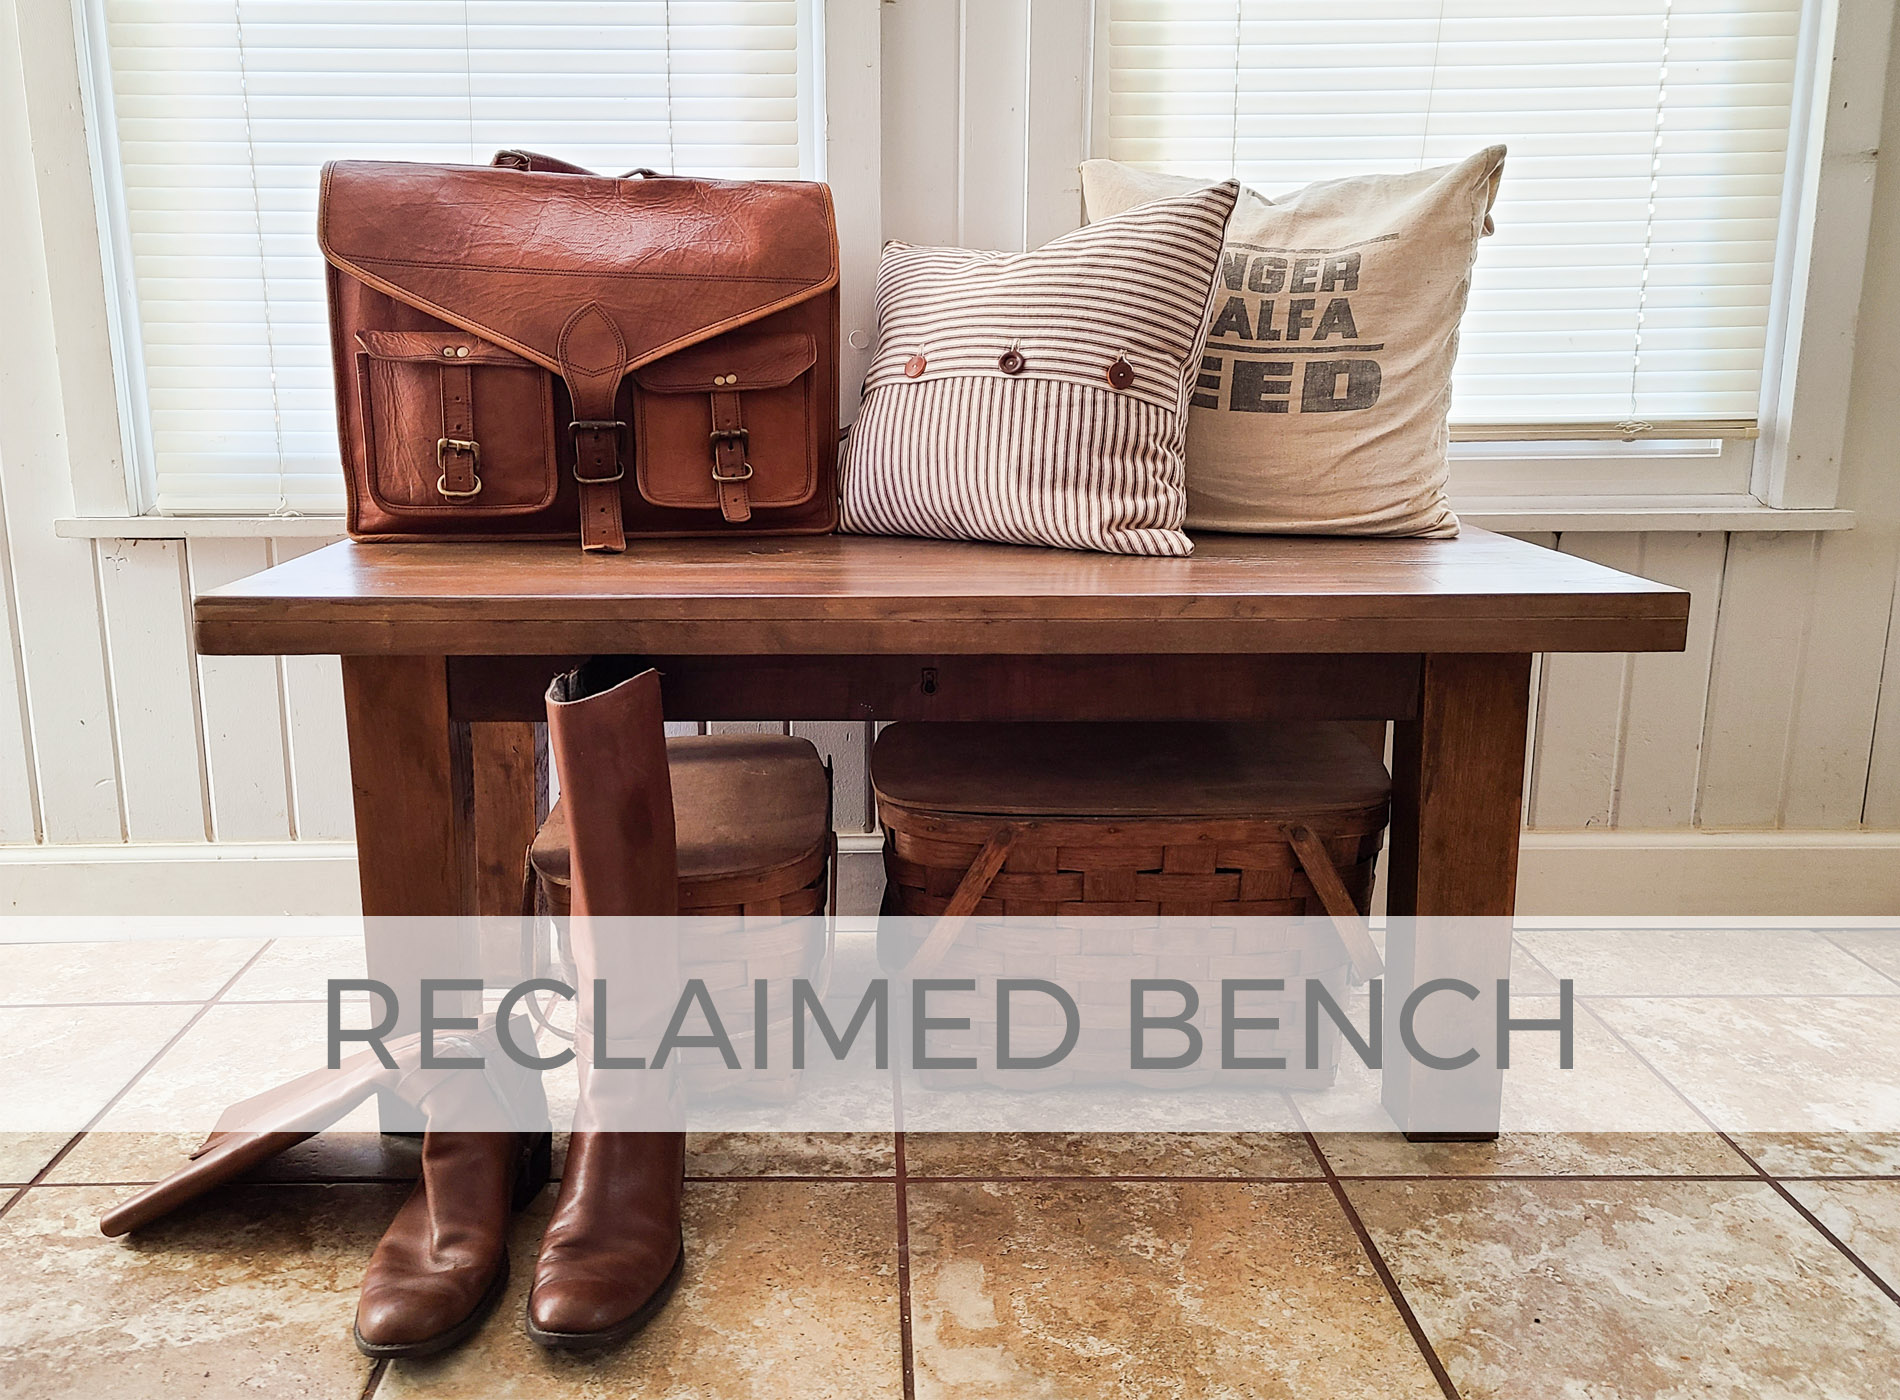 Reclaimed Bench made from Antique Empire Chest by Larissa of Prodigal Pieces | prodigalpieces.com #prodigalpieces